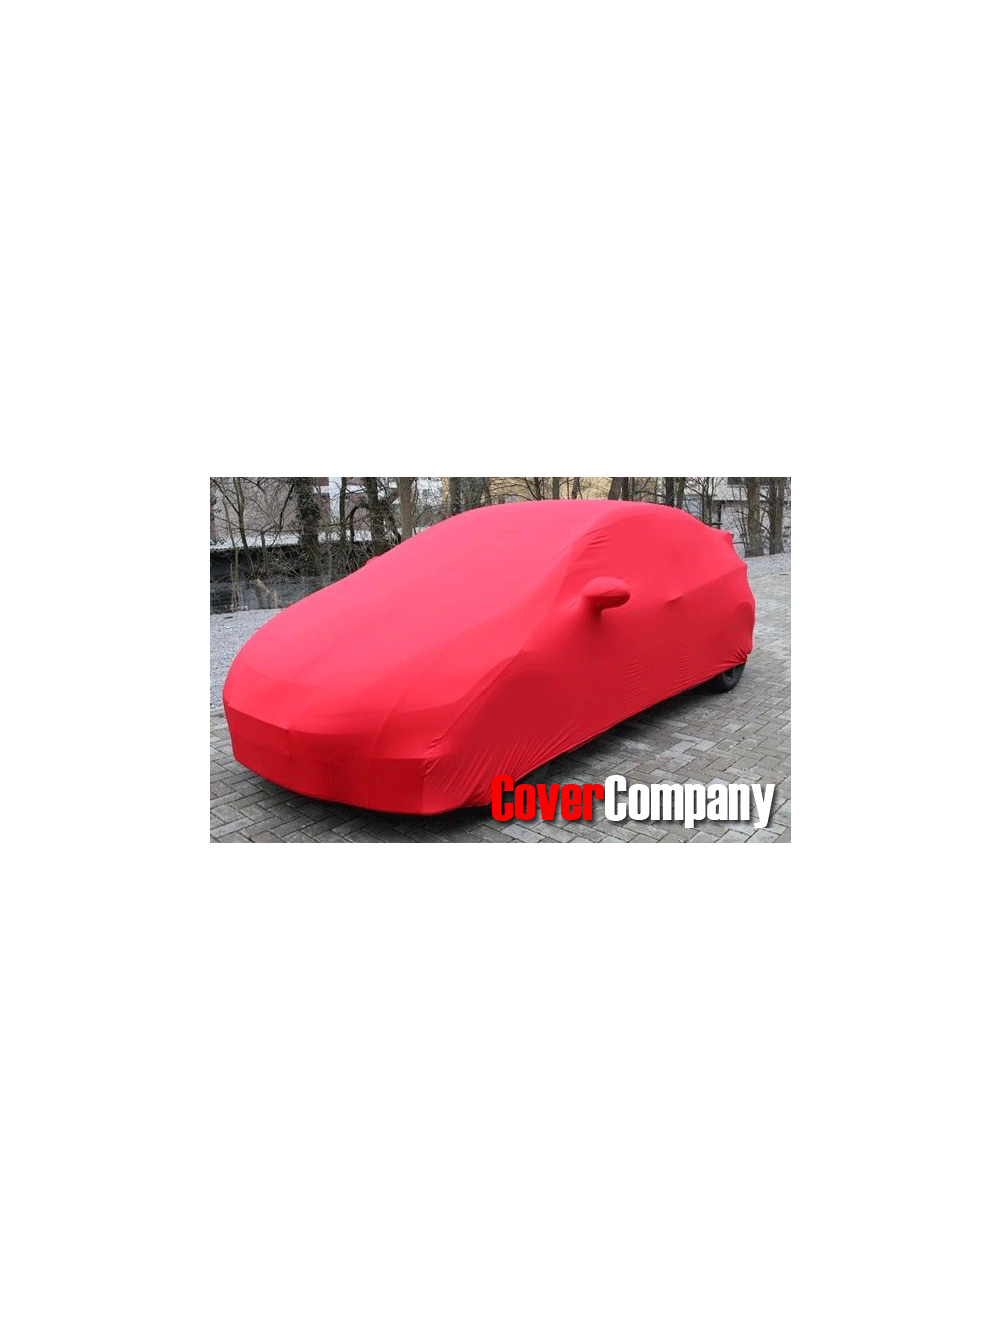 Indoor Honda Car Cover. High quality car covers US